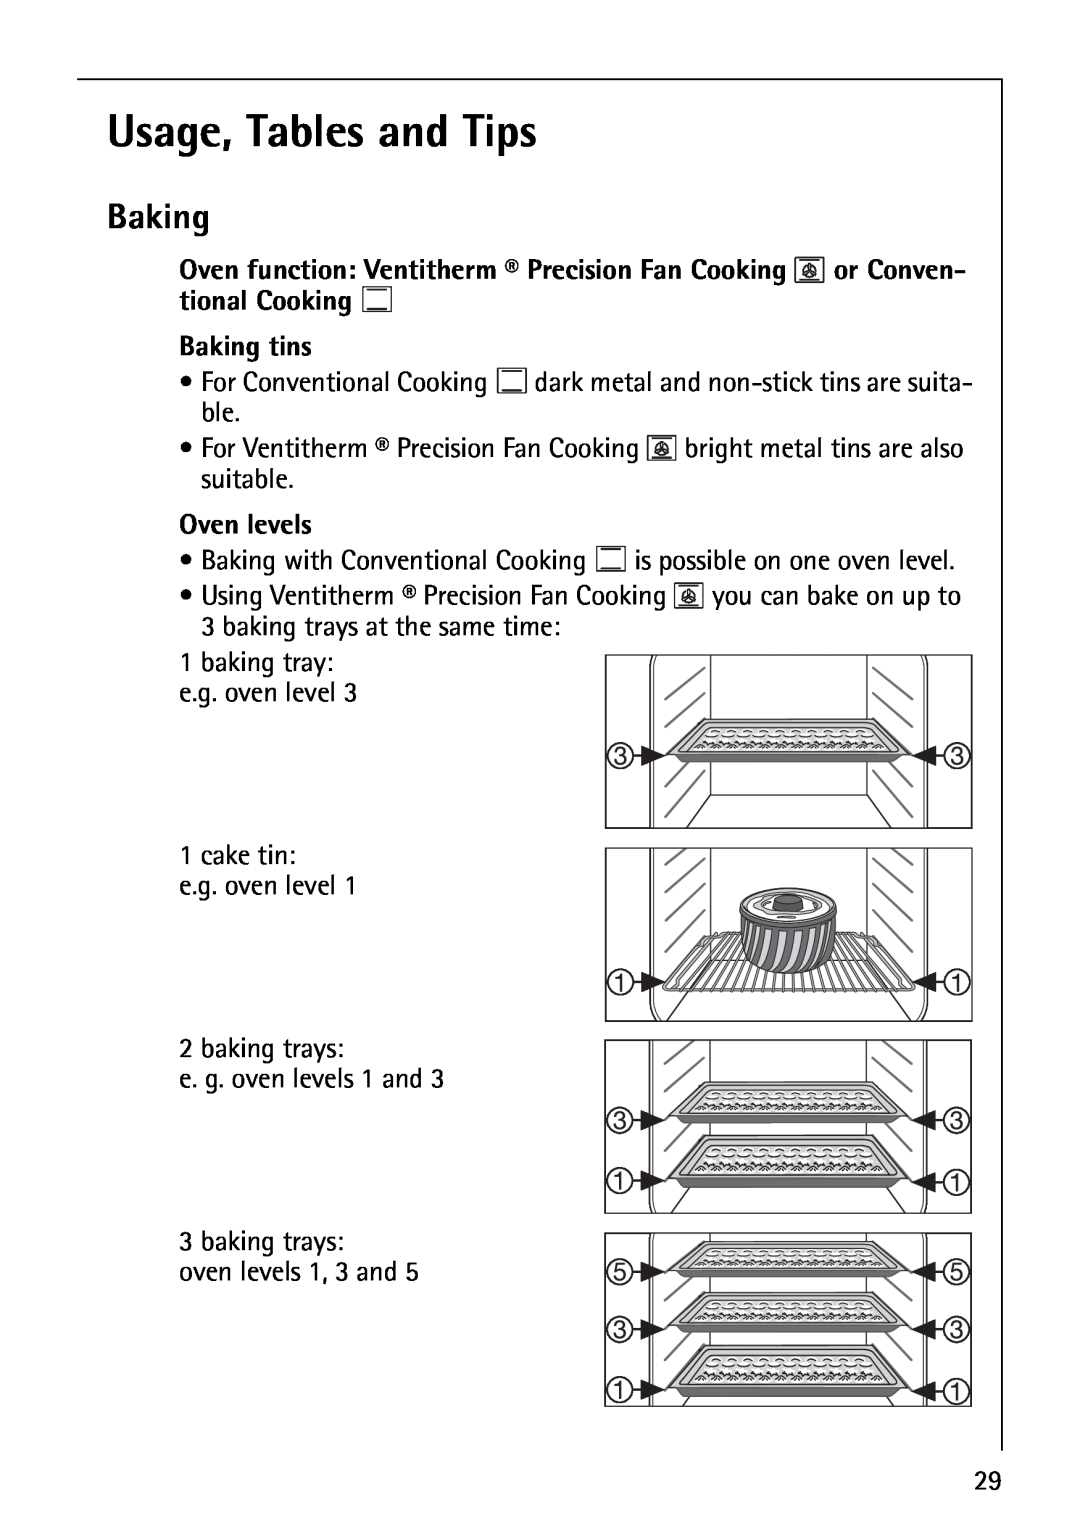 Electrolux B8871-4 manual Usage, Tables and Tips, Baking tins, Oven levels 